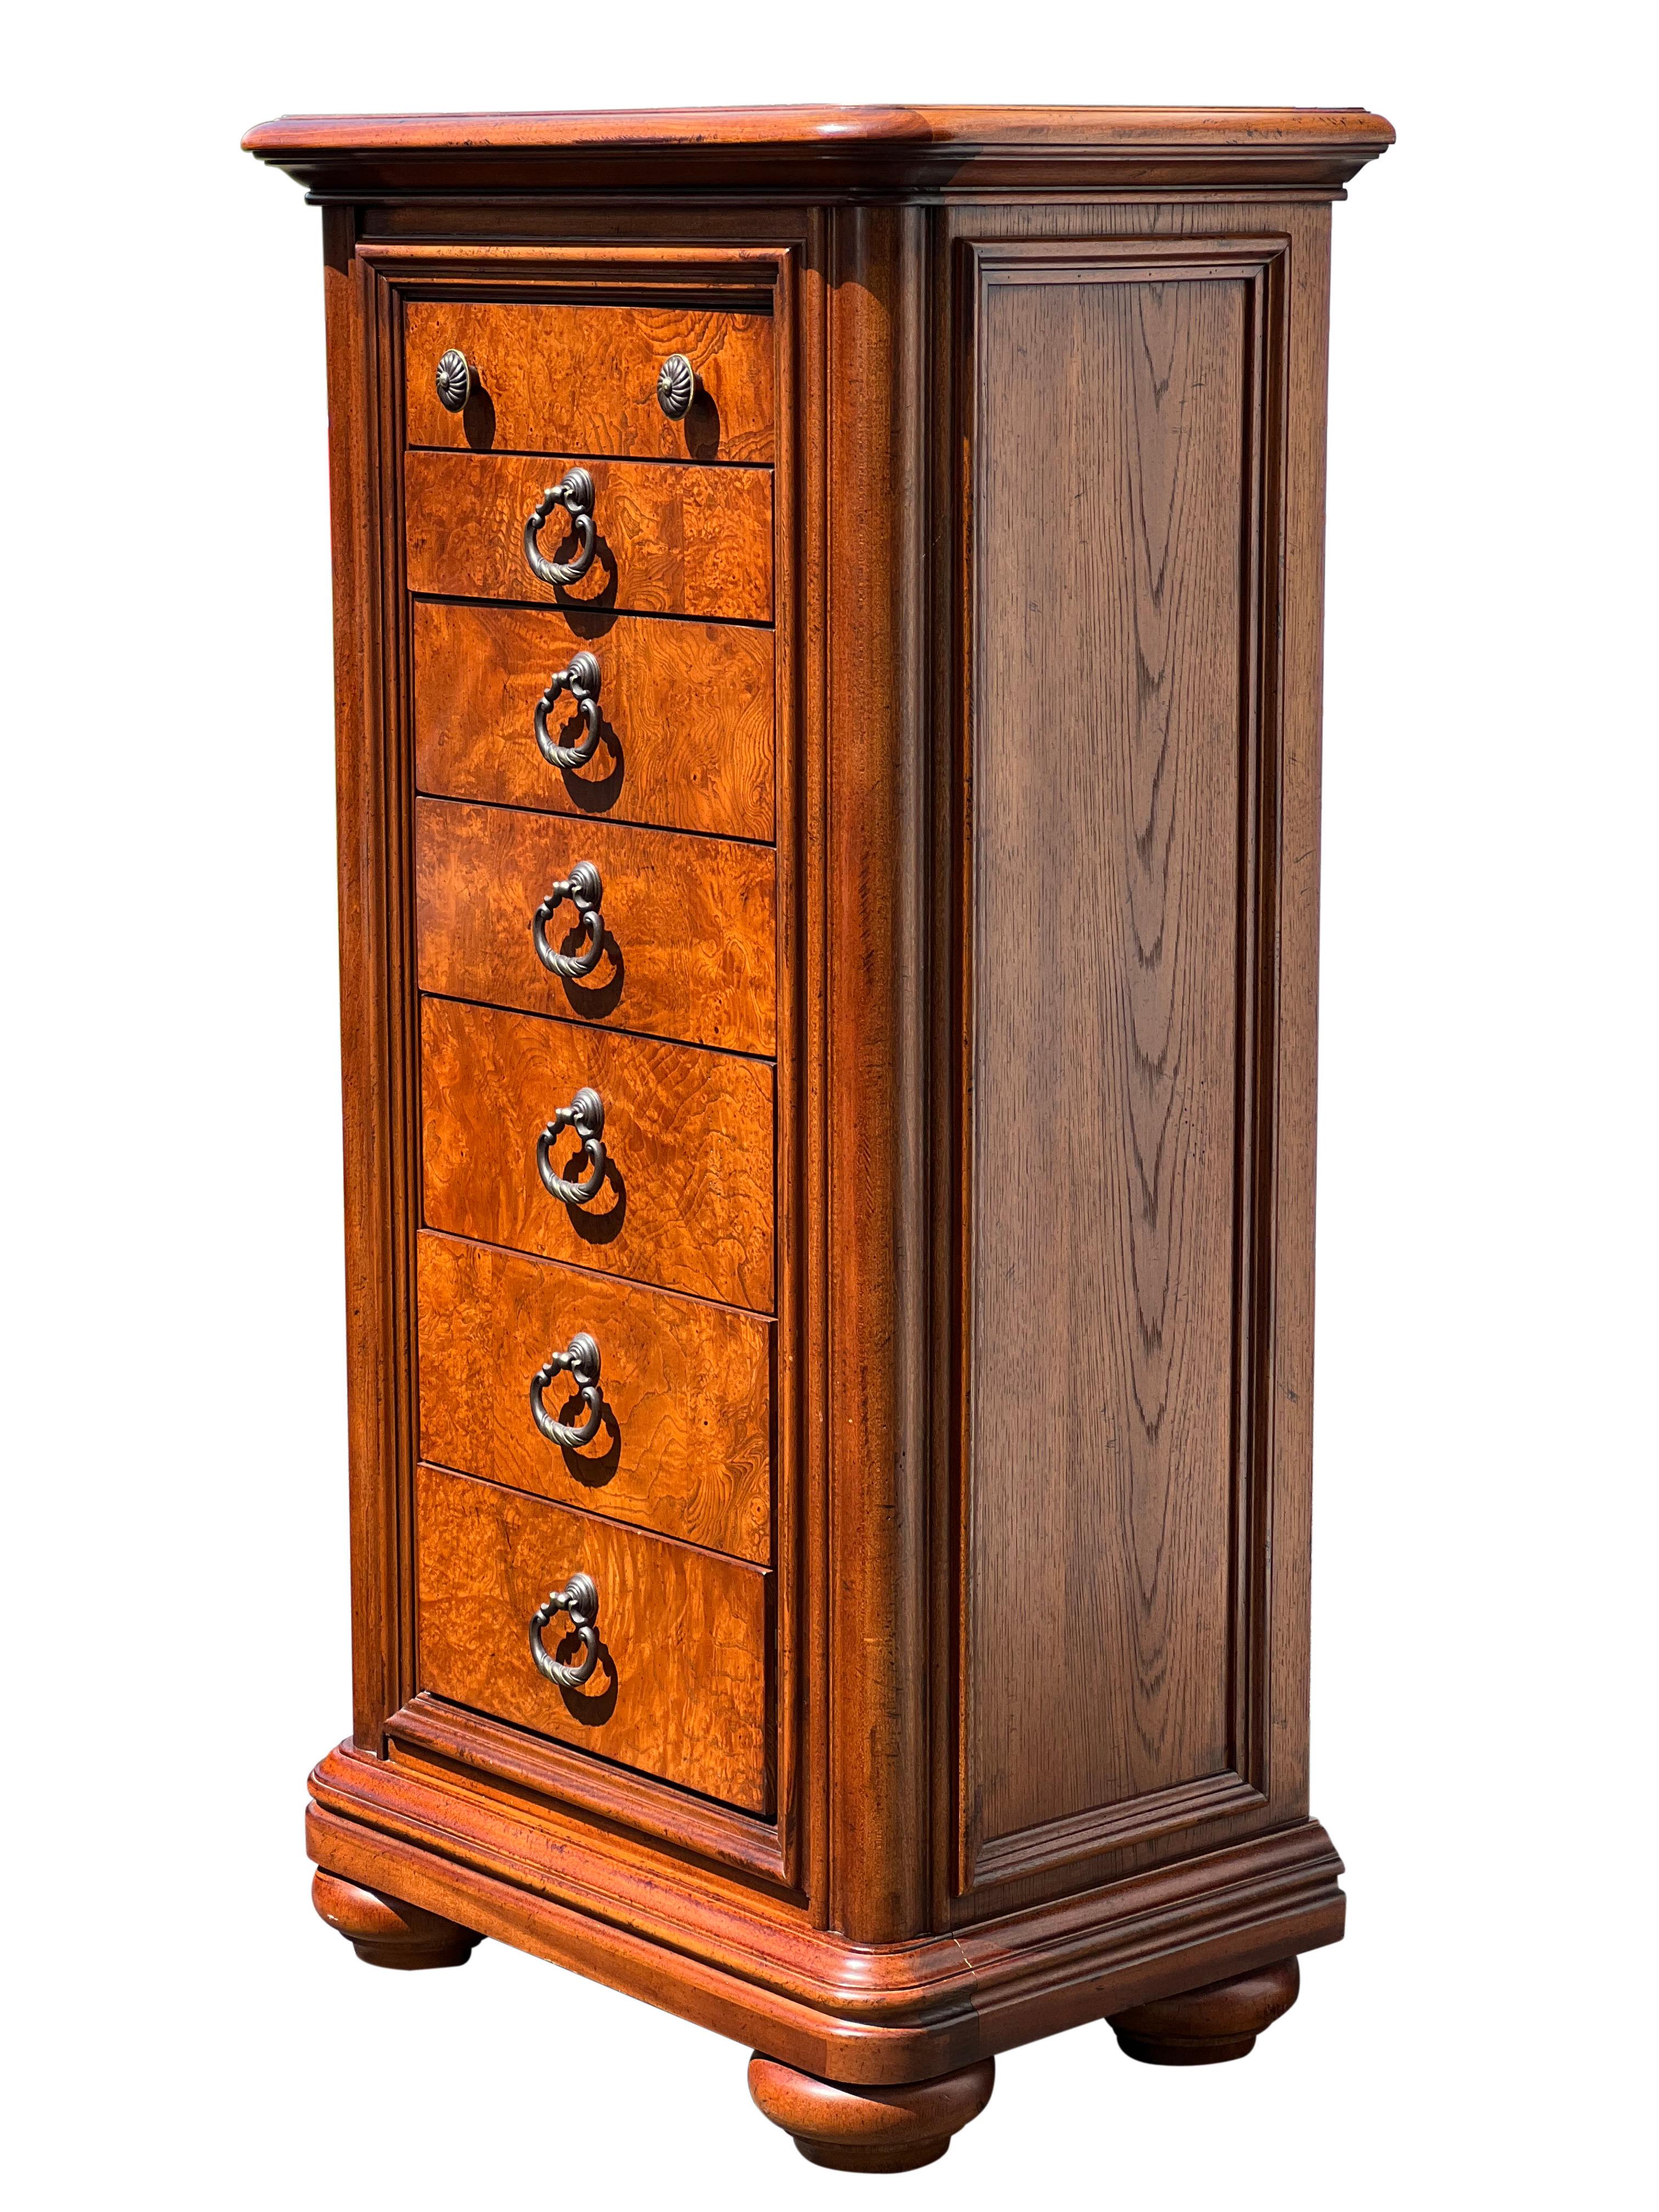 Handsome Thomasville lingerie chest from the British Gentry Collection.

Beautiful molding frames the burl wood dovetail drawers which have elegant, mixed metal drop pull handles. The top drawer has round knobs and offers felt lined, divided